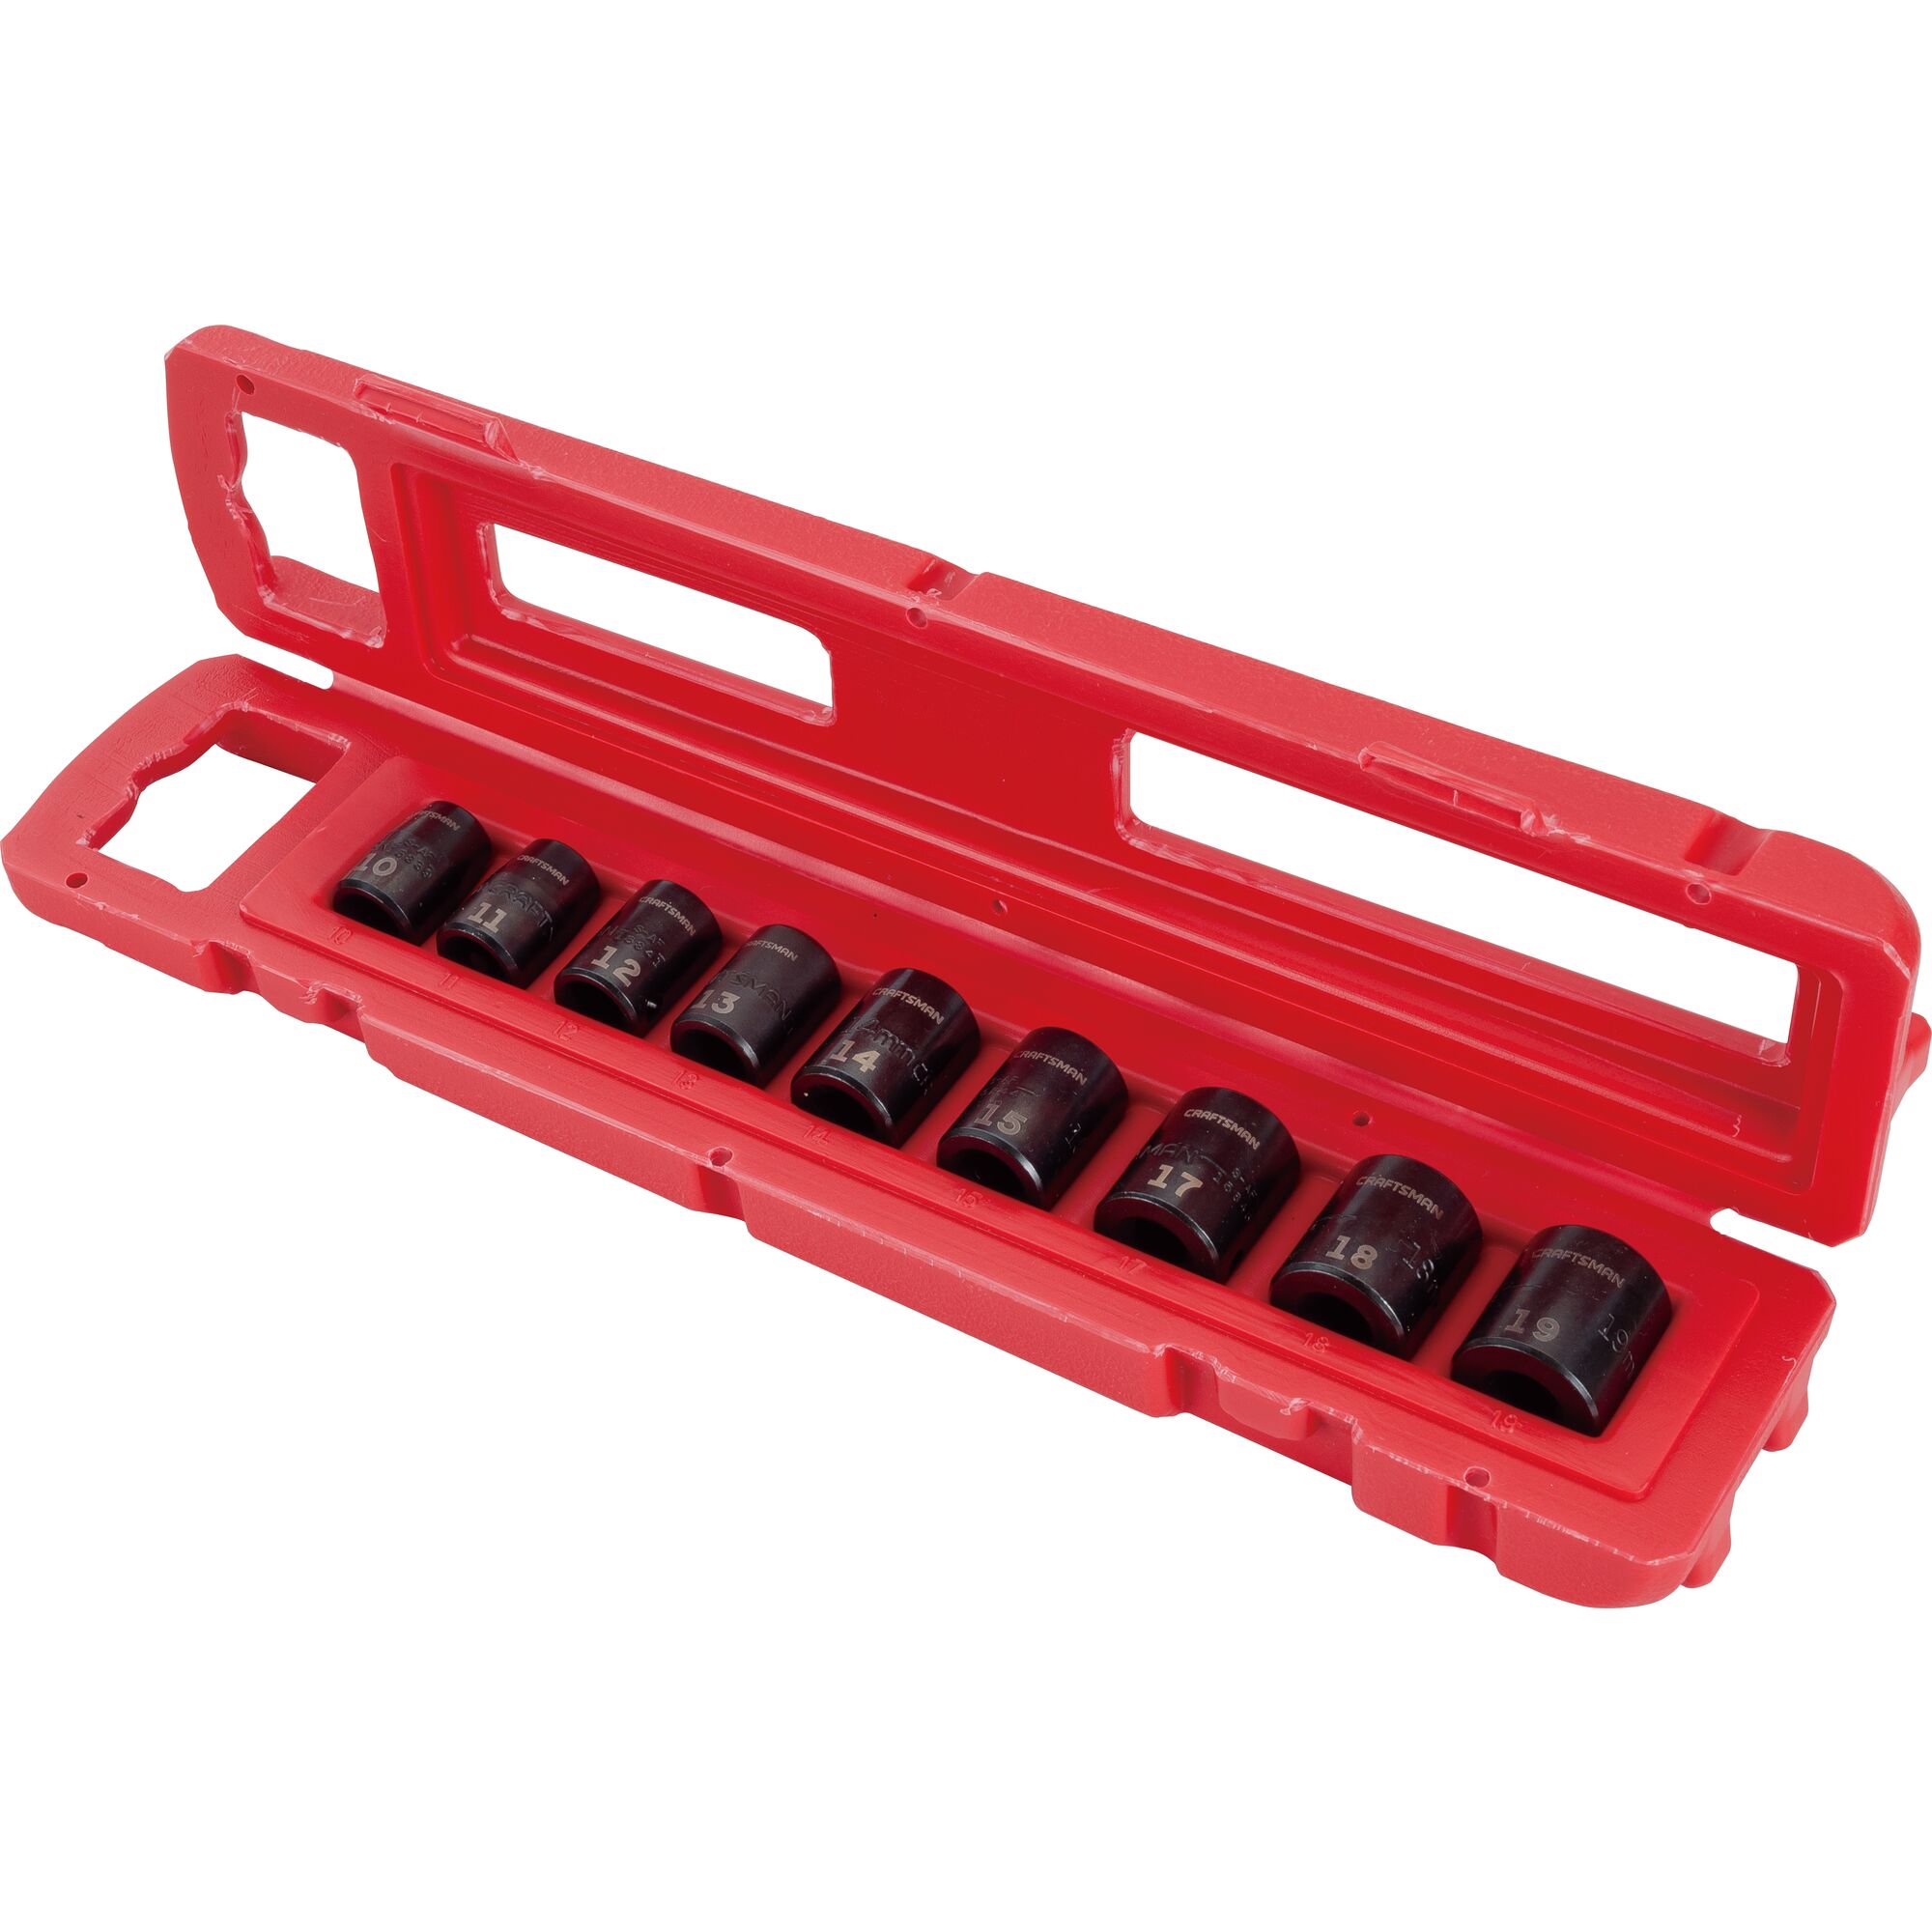 9 piece 3 eighths inch metric impact socket set and box.